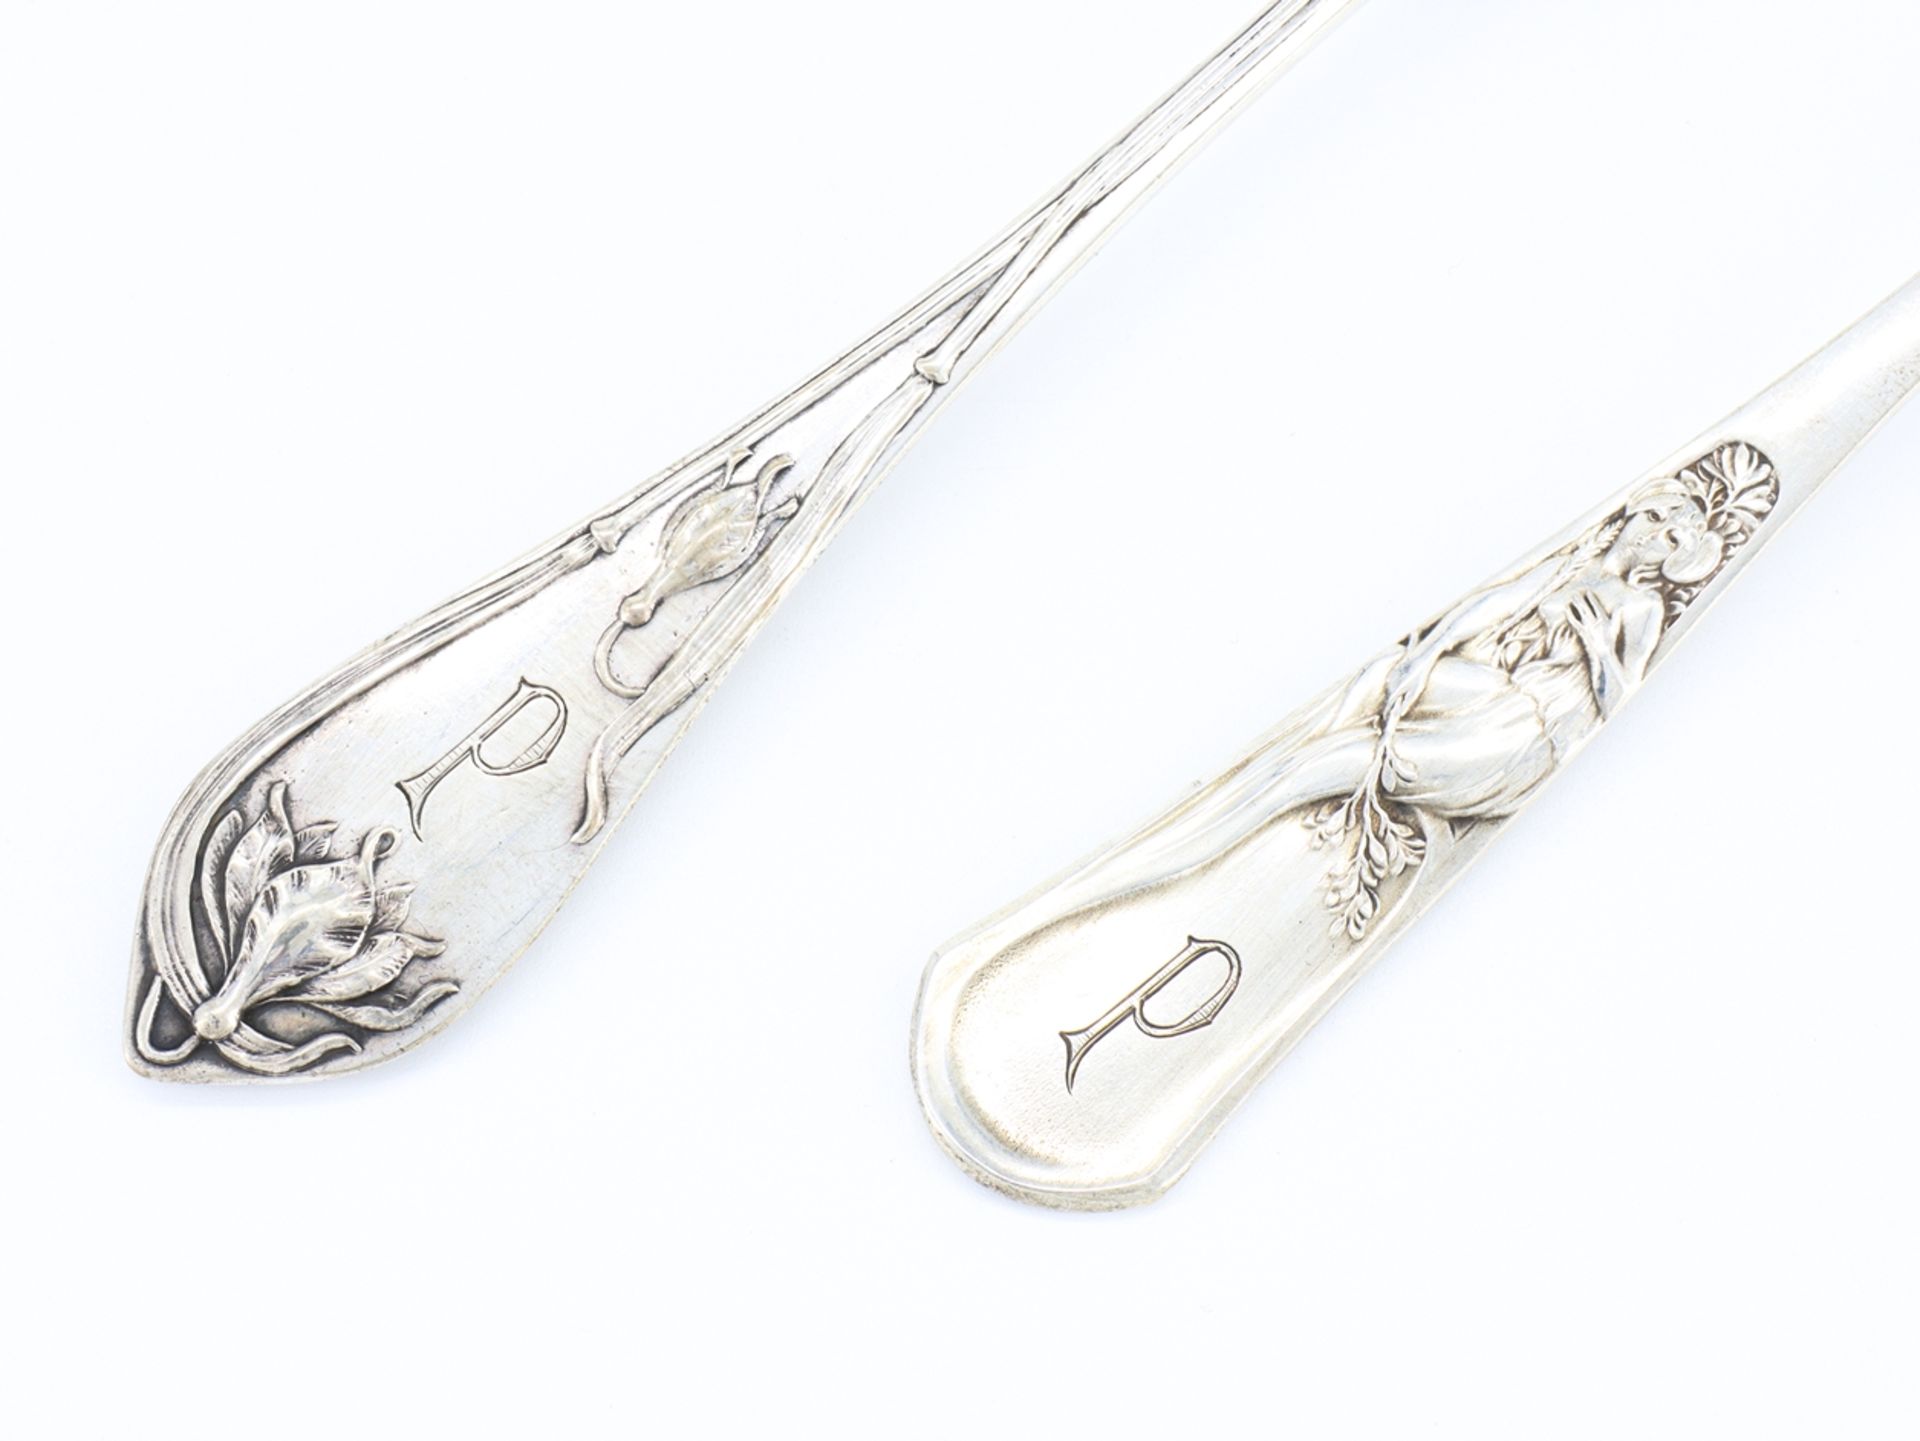 2 pieces of cutlery in finest art nouveau 800 silver circa 1900. - Image 5 of 8